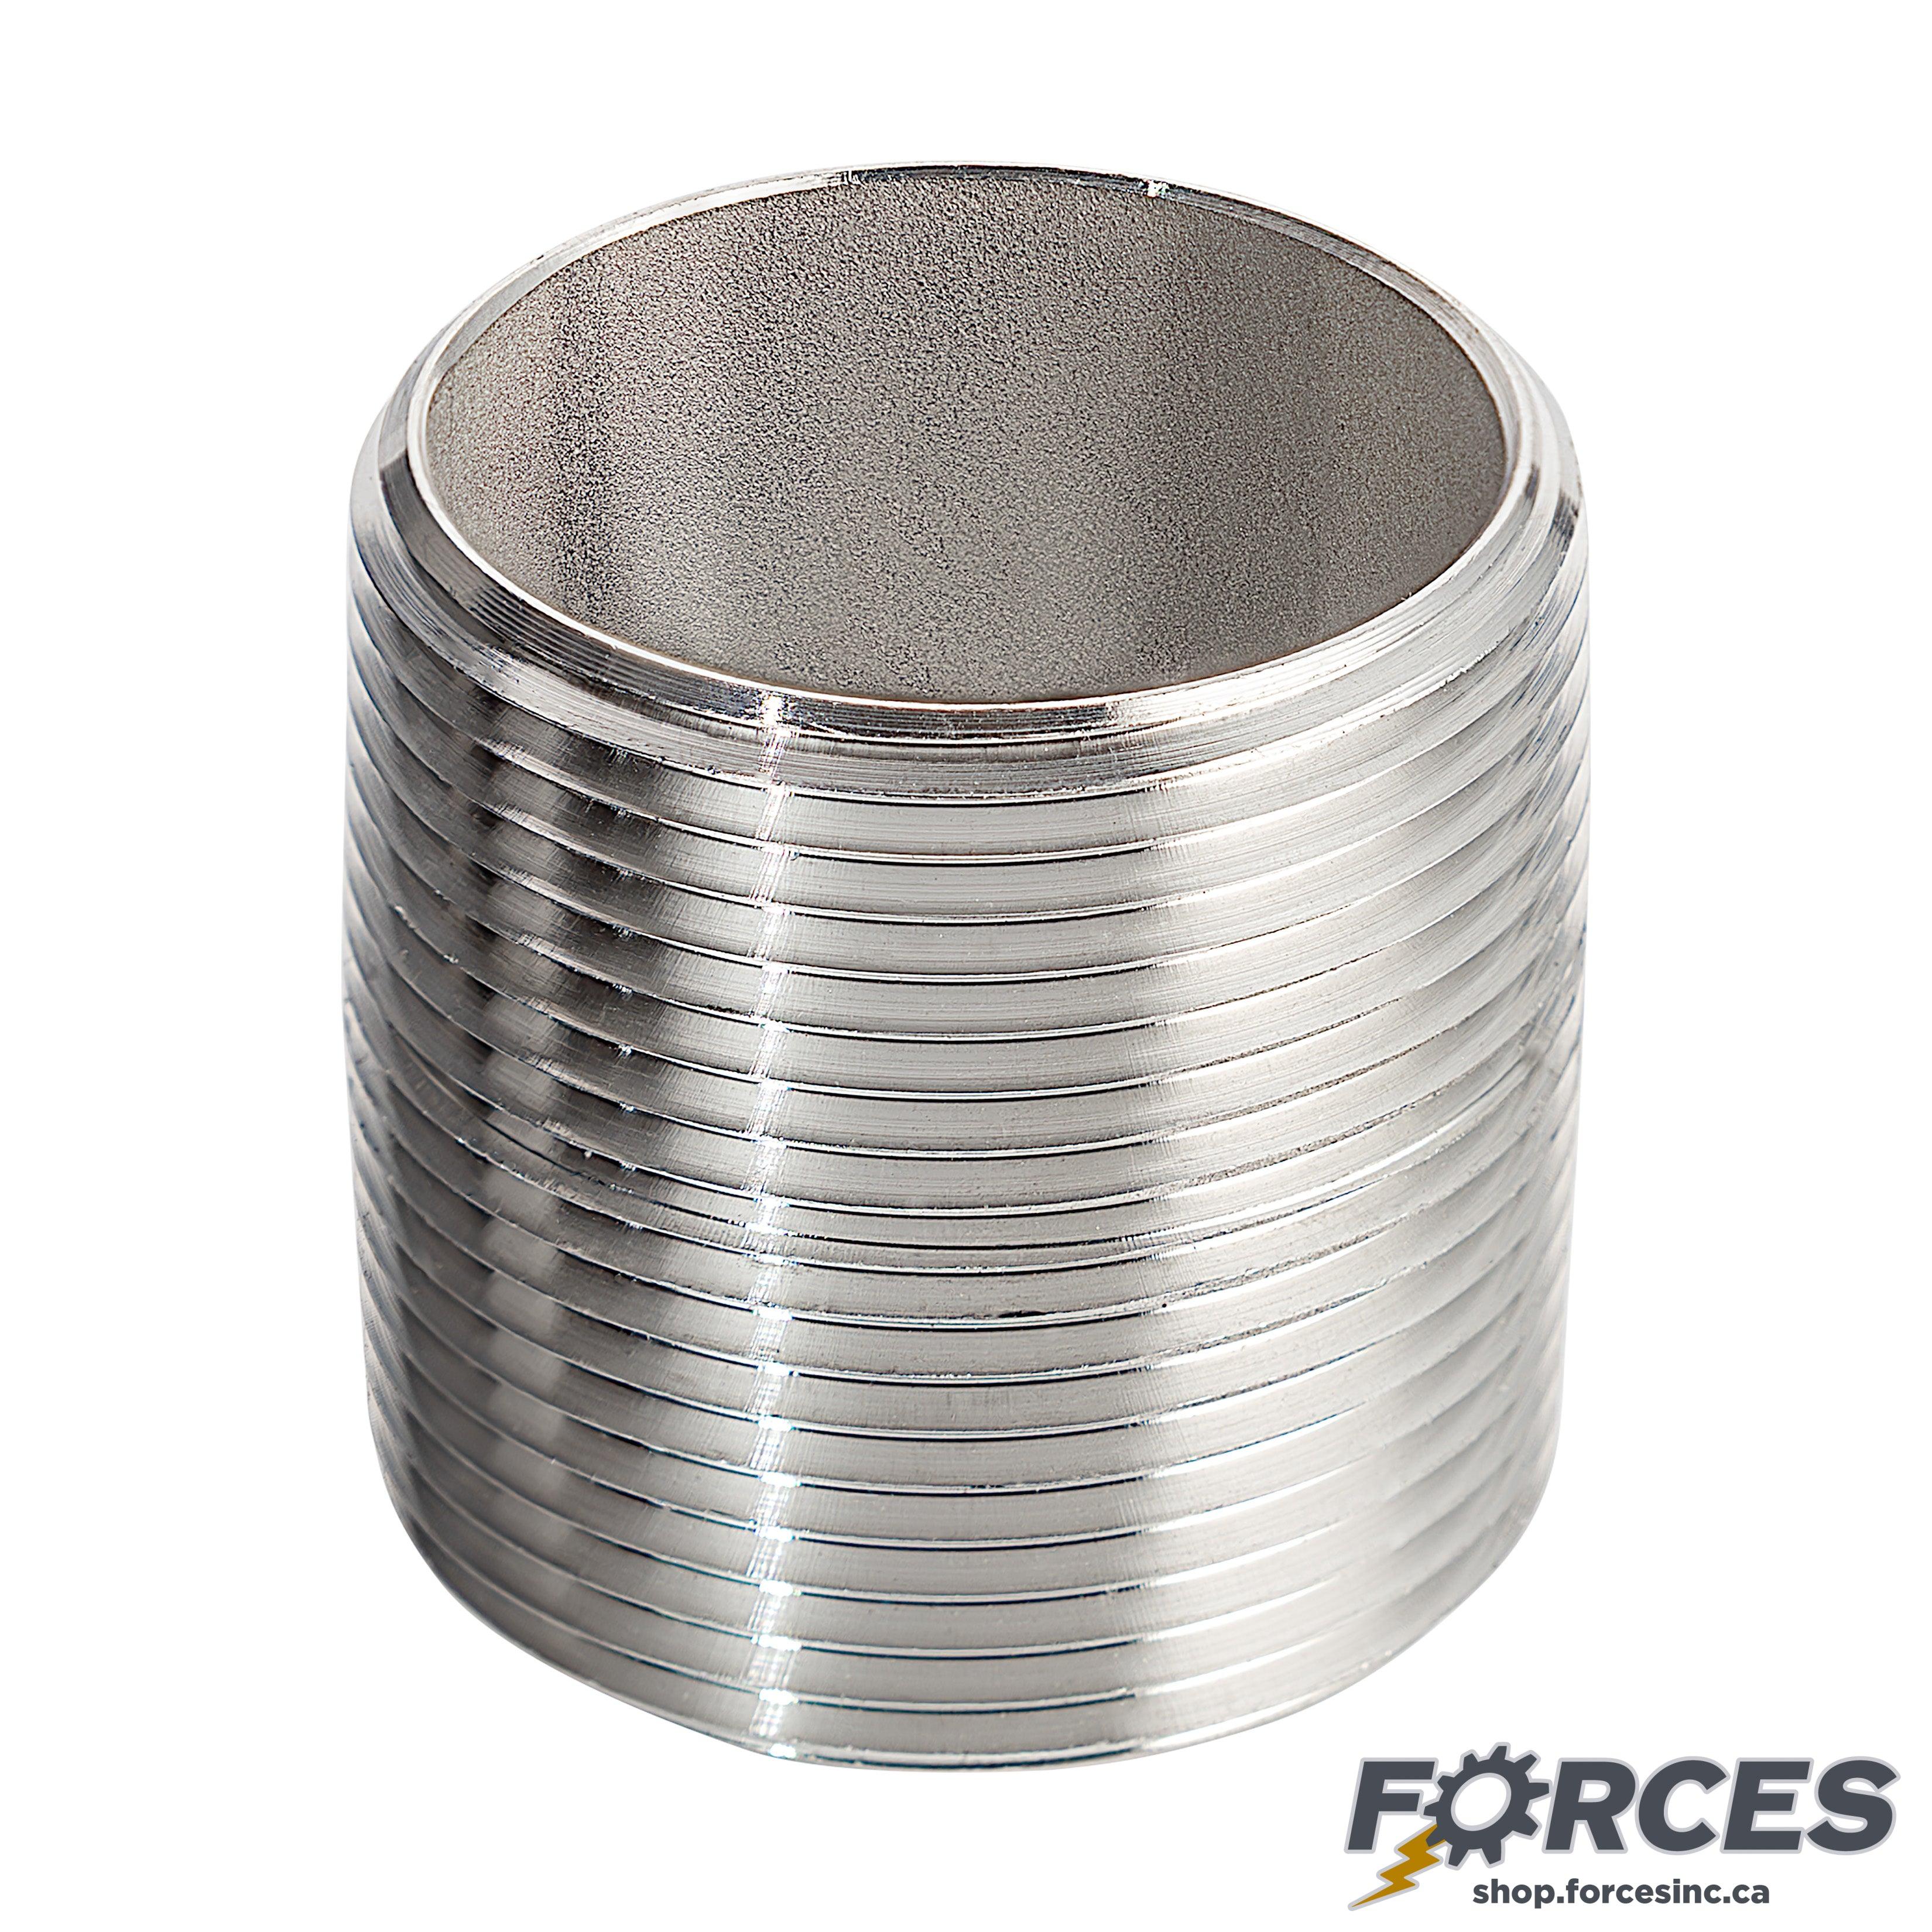 2-1/2" Closed Nipple - Stainless Steel 316 - Forces Inc